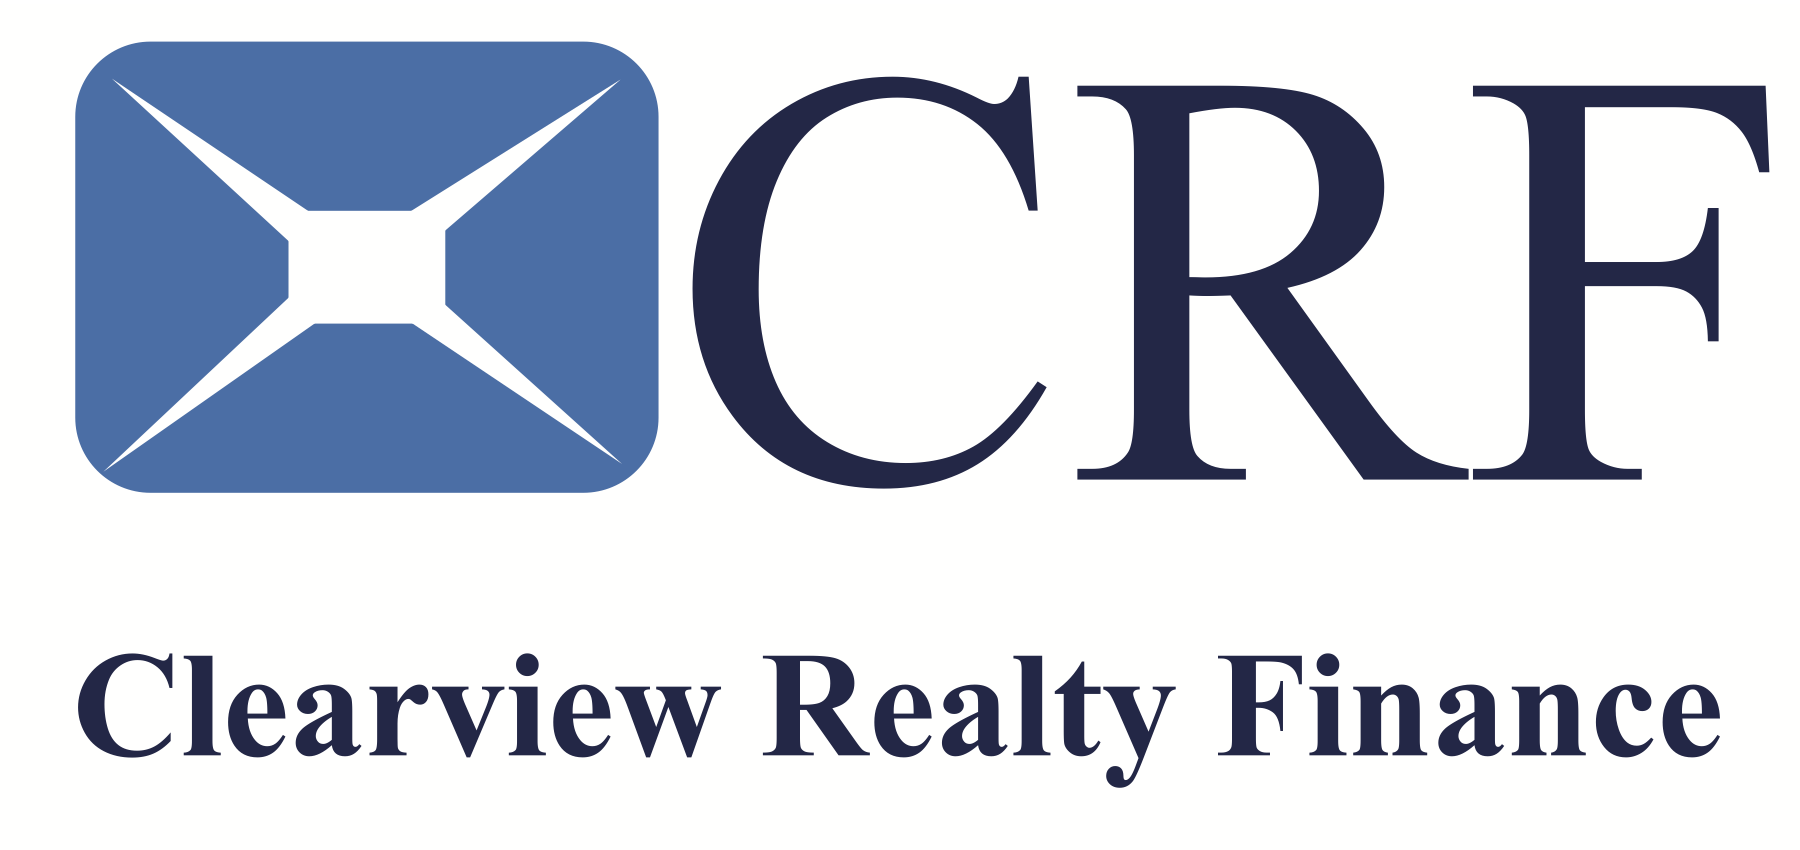 Clearview Realty Finance